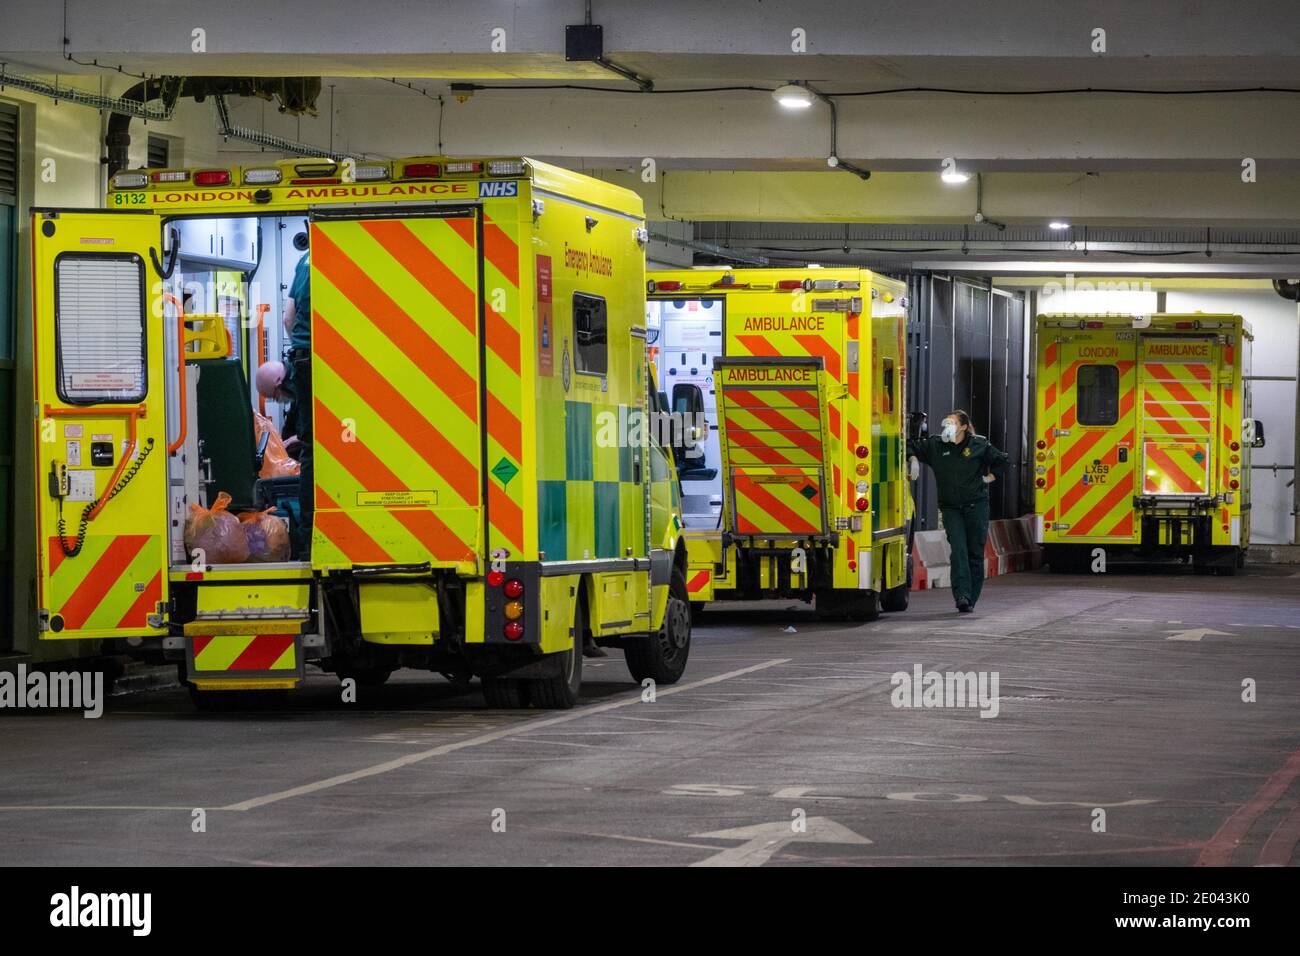 Emergency ambulances of London Ambulance Service queued outside the Royal Free Hospital Accident and Emergency (A&E) department. Stock Photo